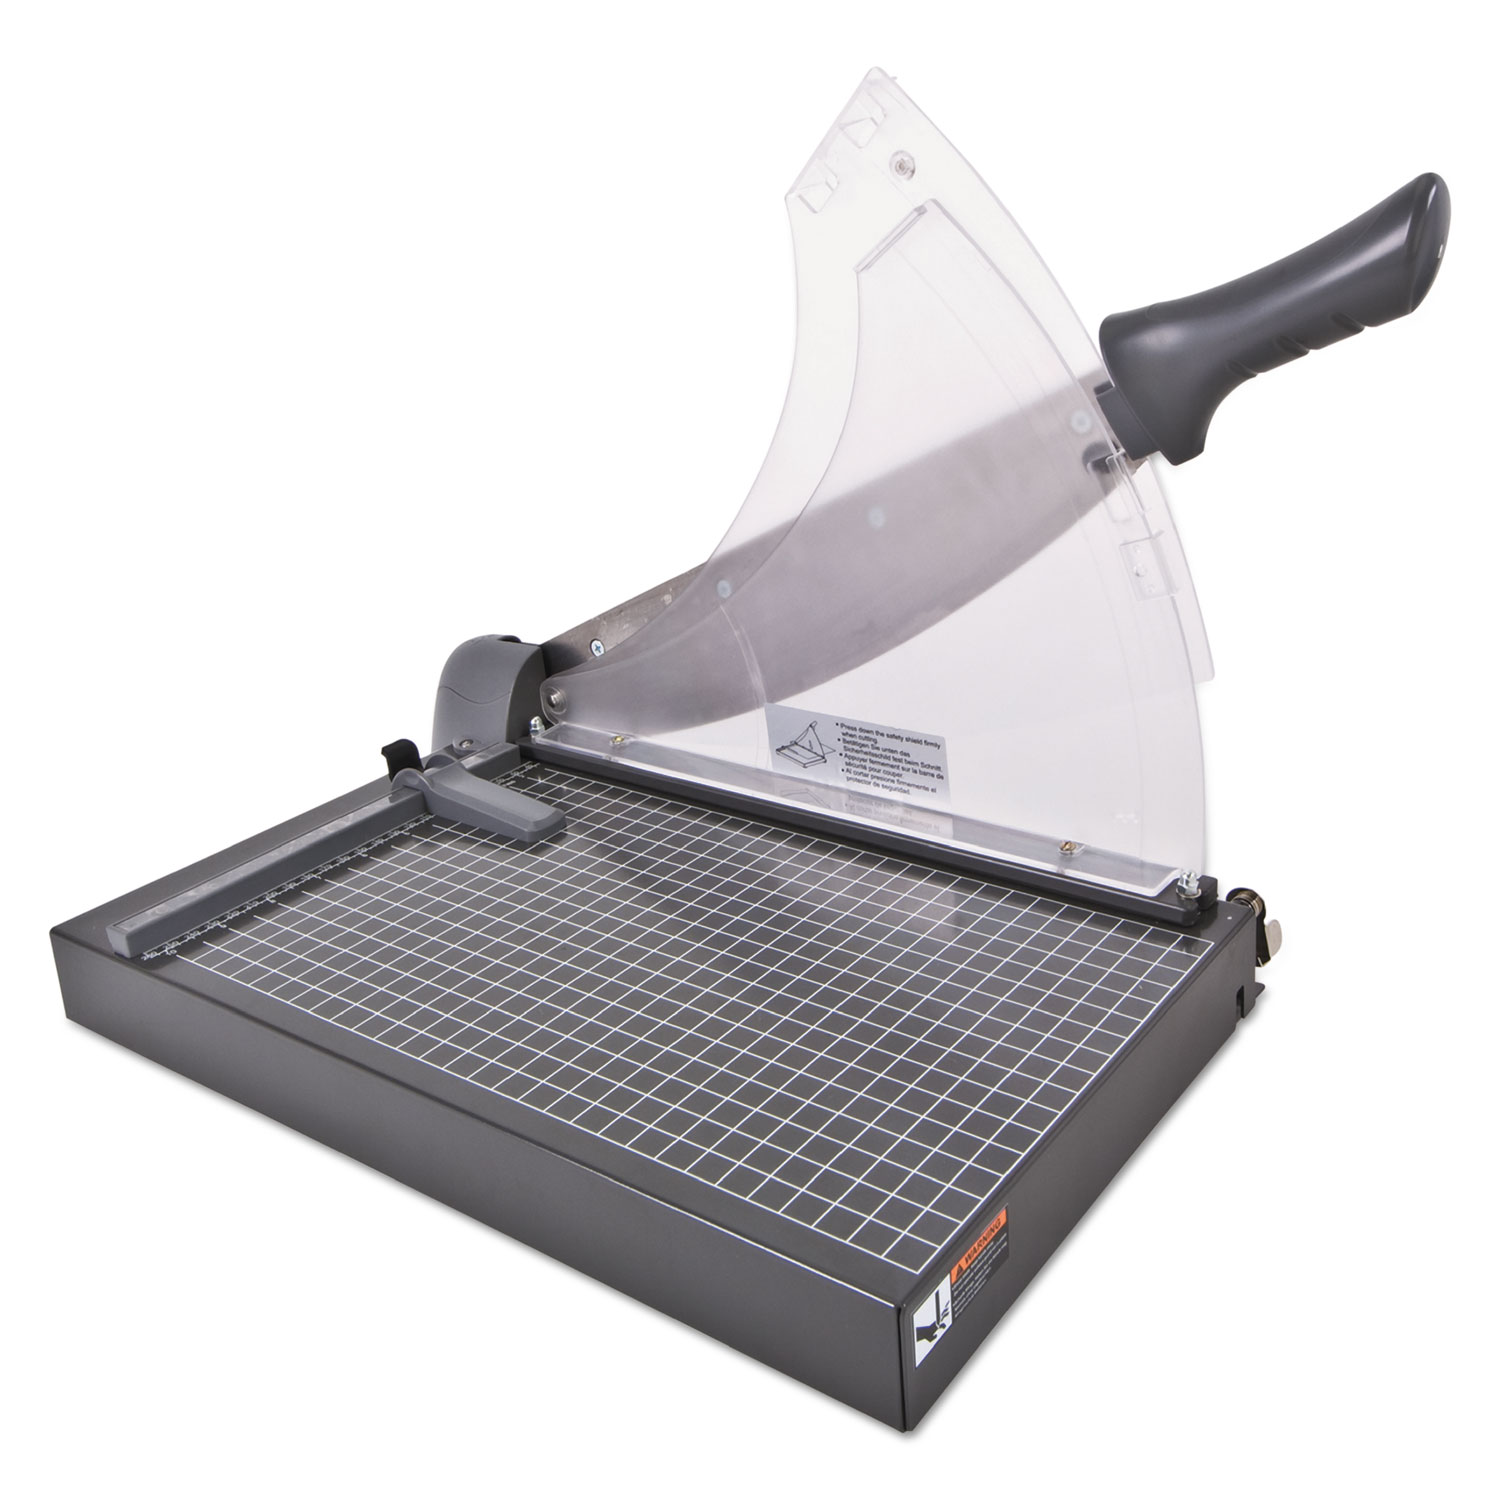 Need a Heavy Duty Guillotine Paper Cutter?